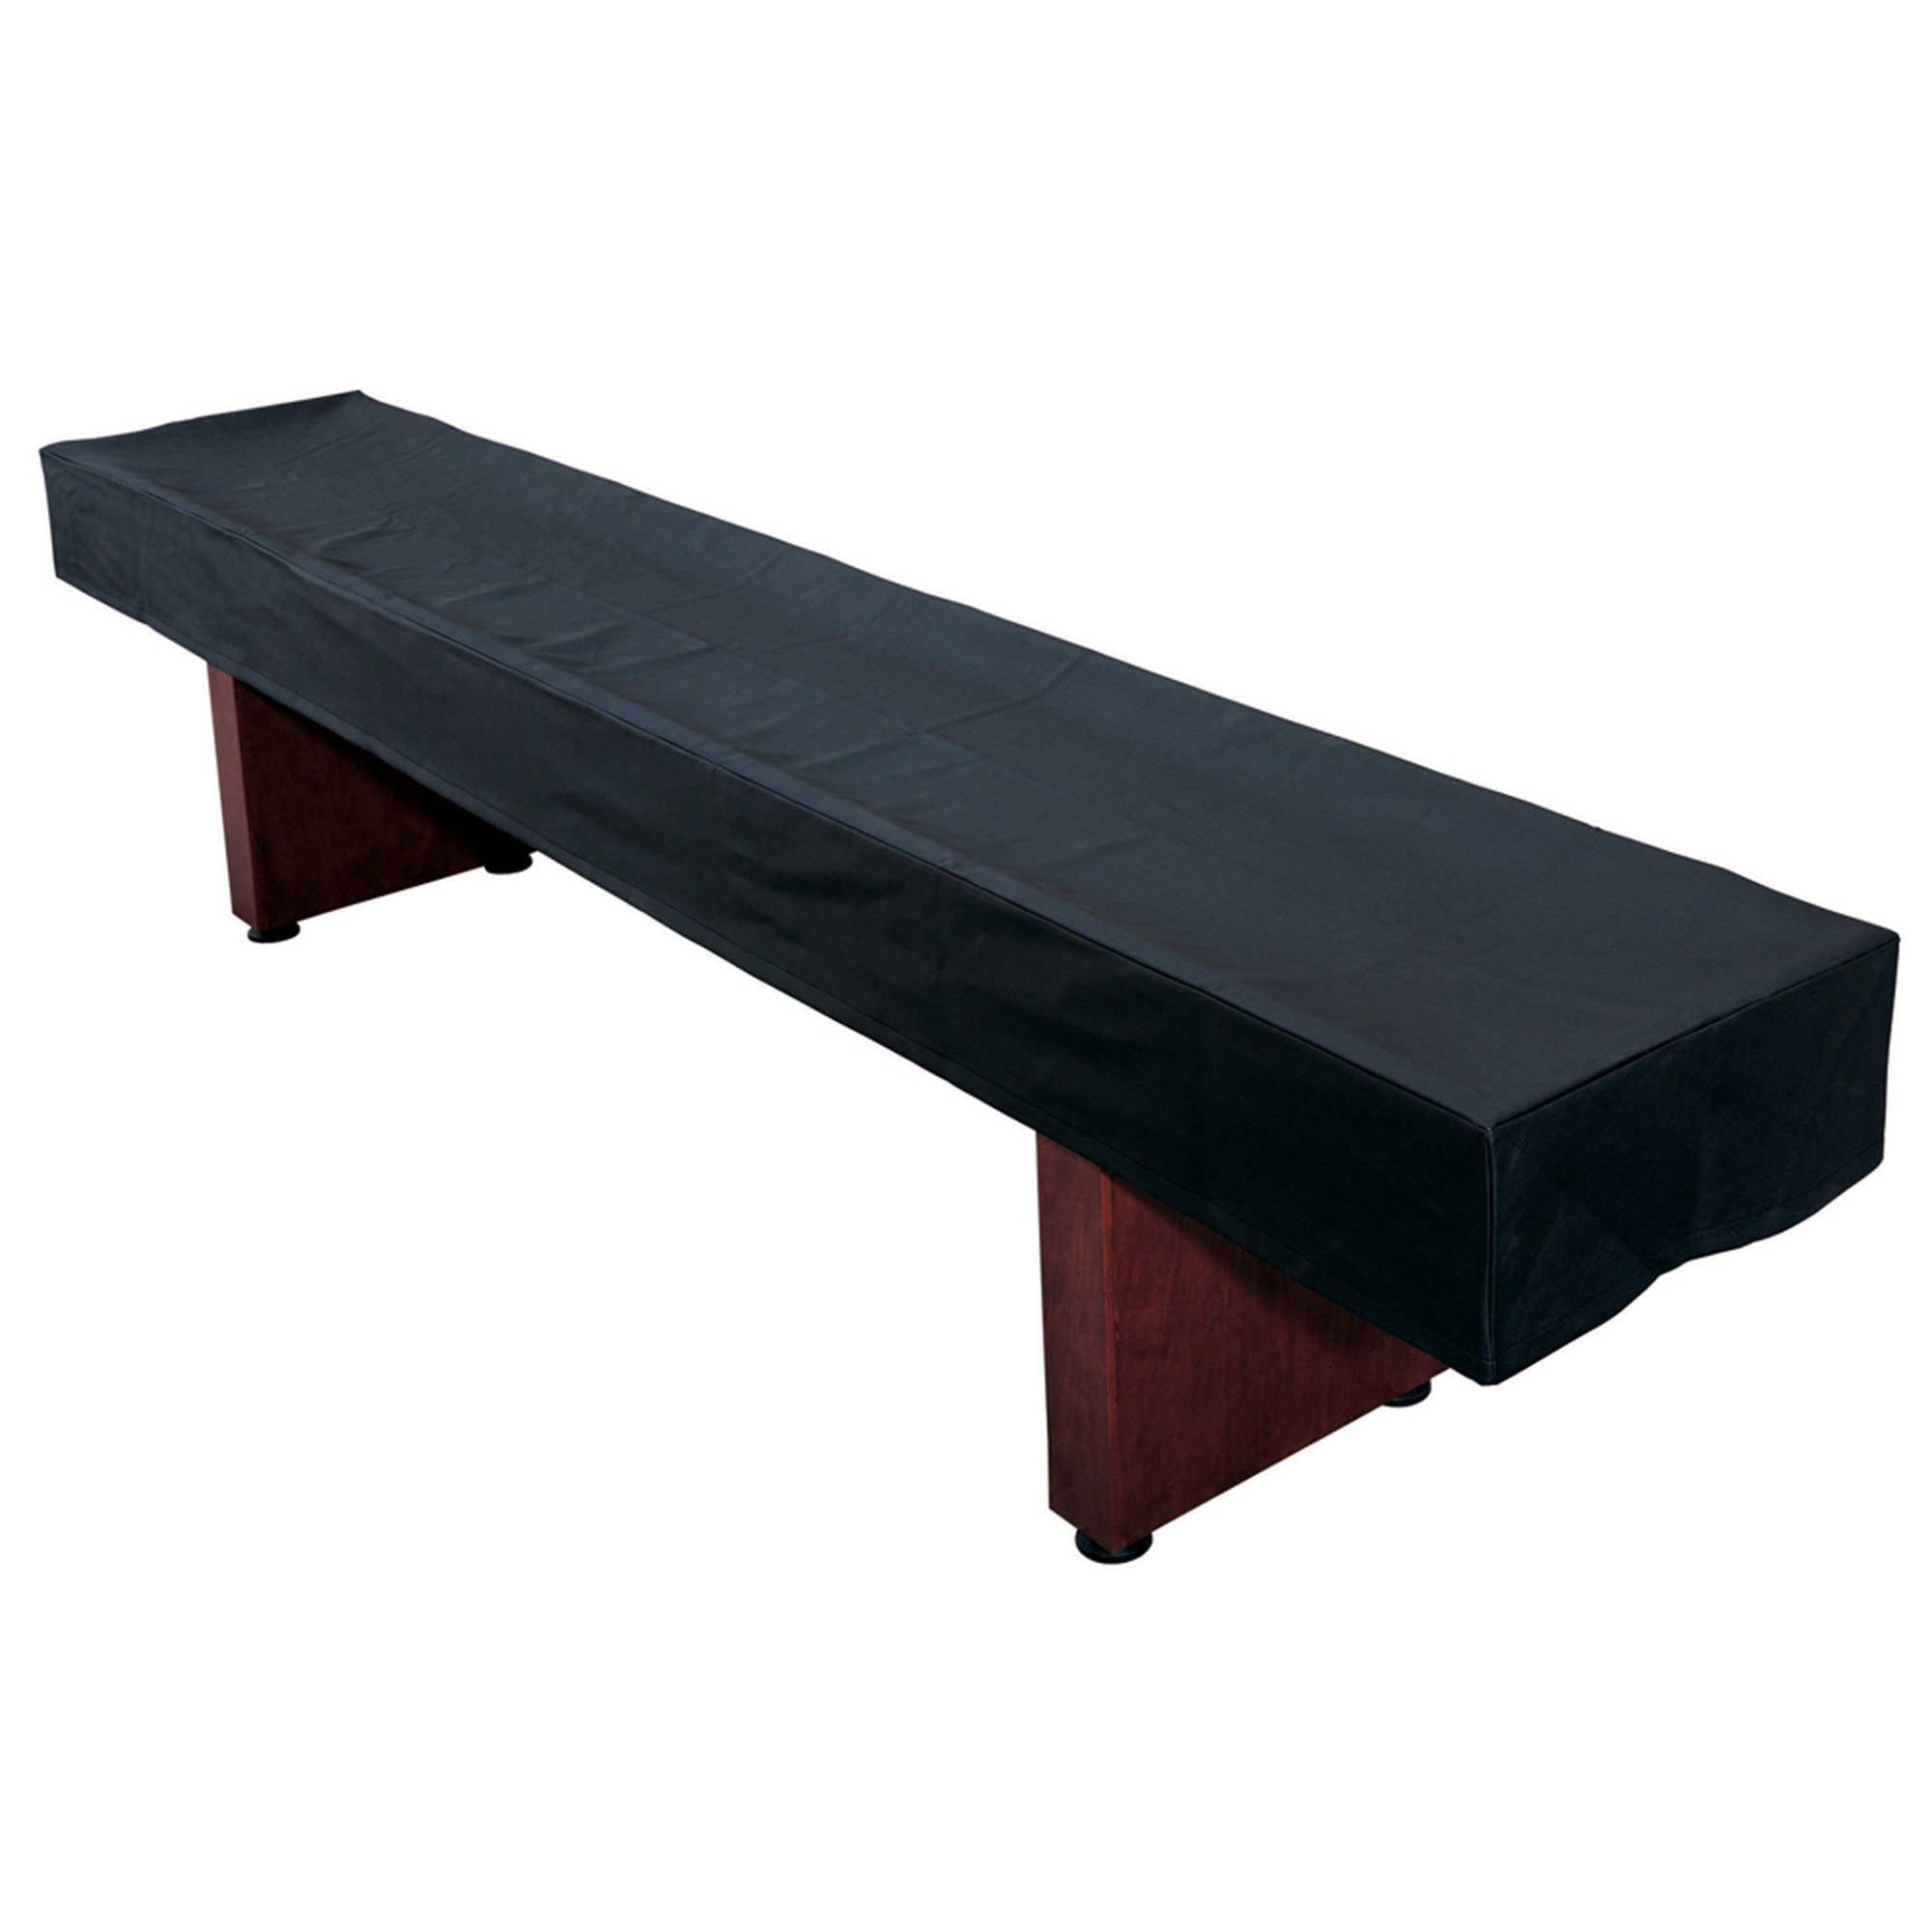 Cover for 12' Shuffleboard Table - Black